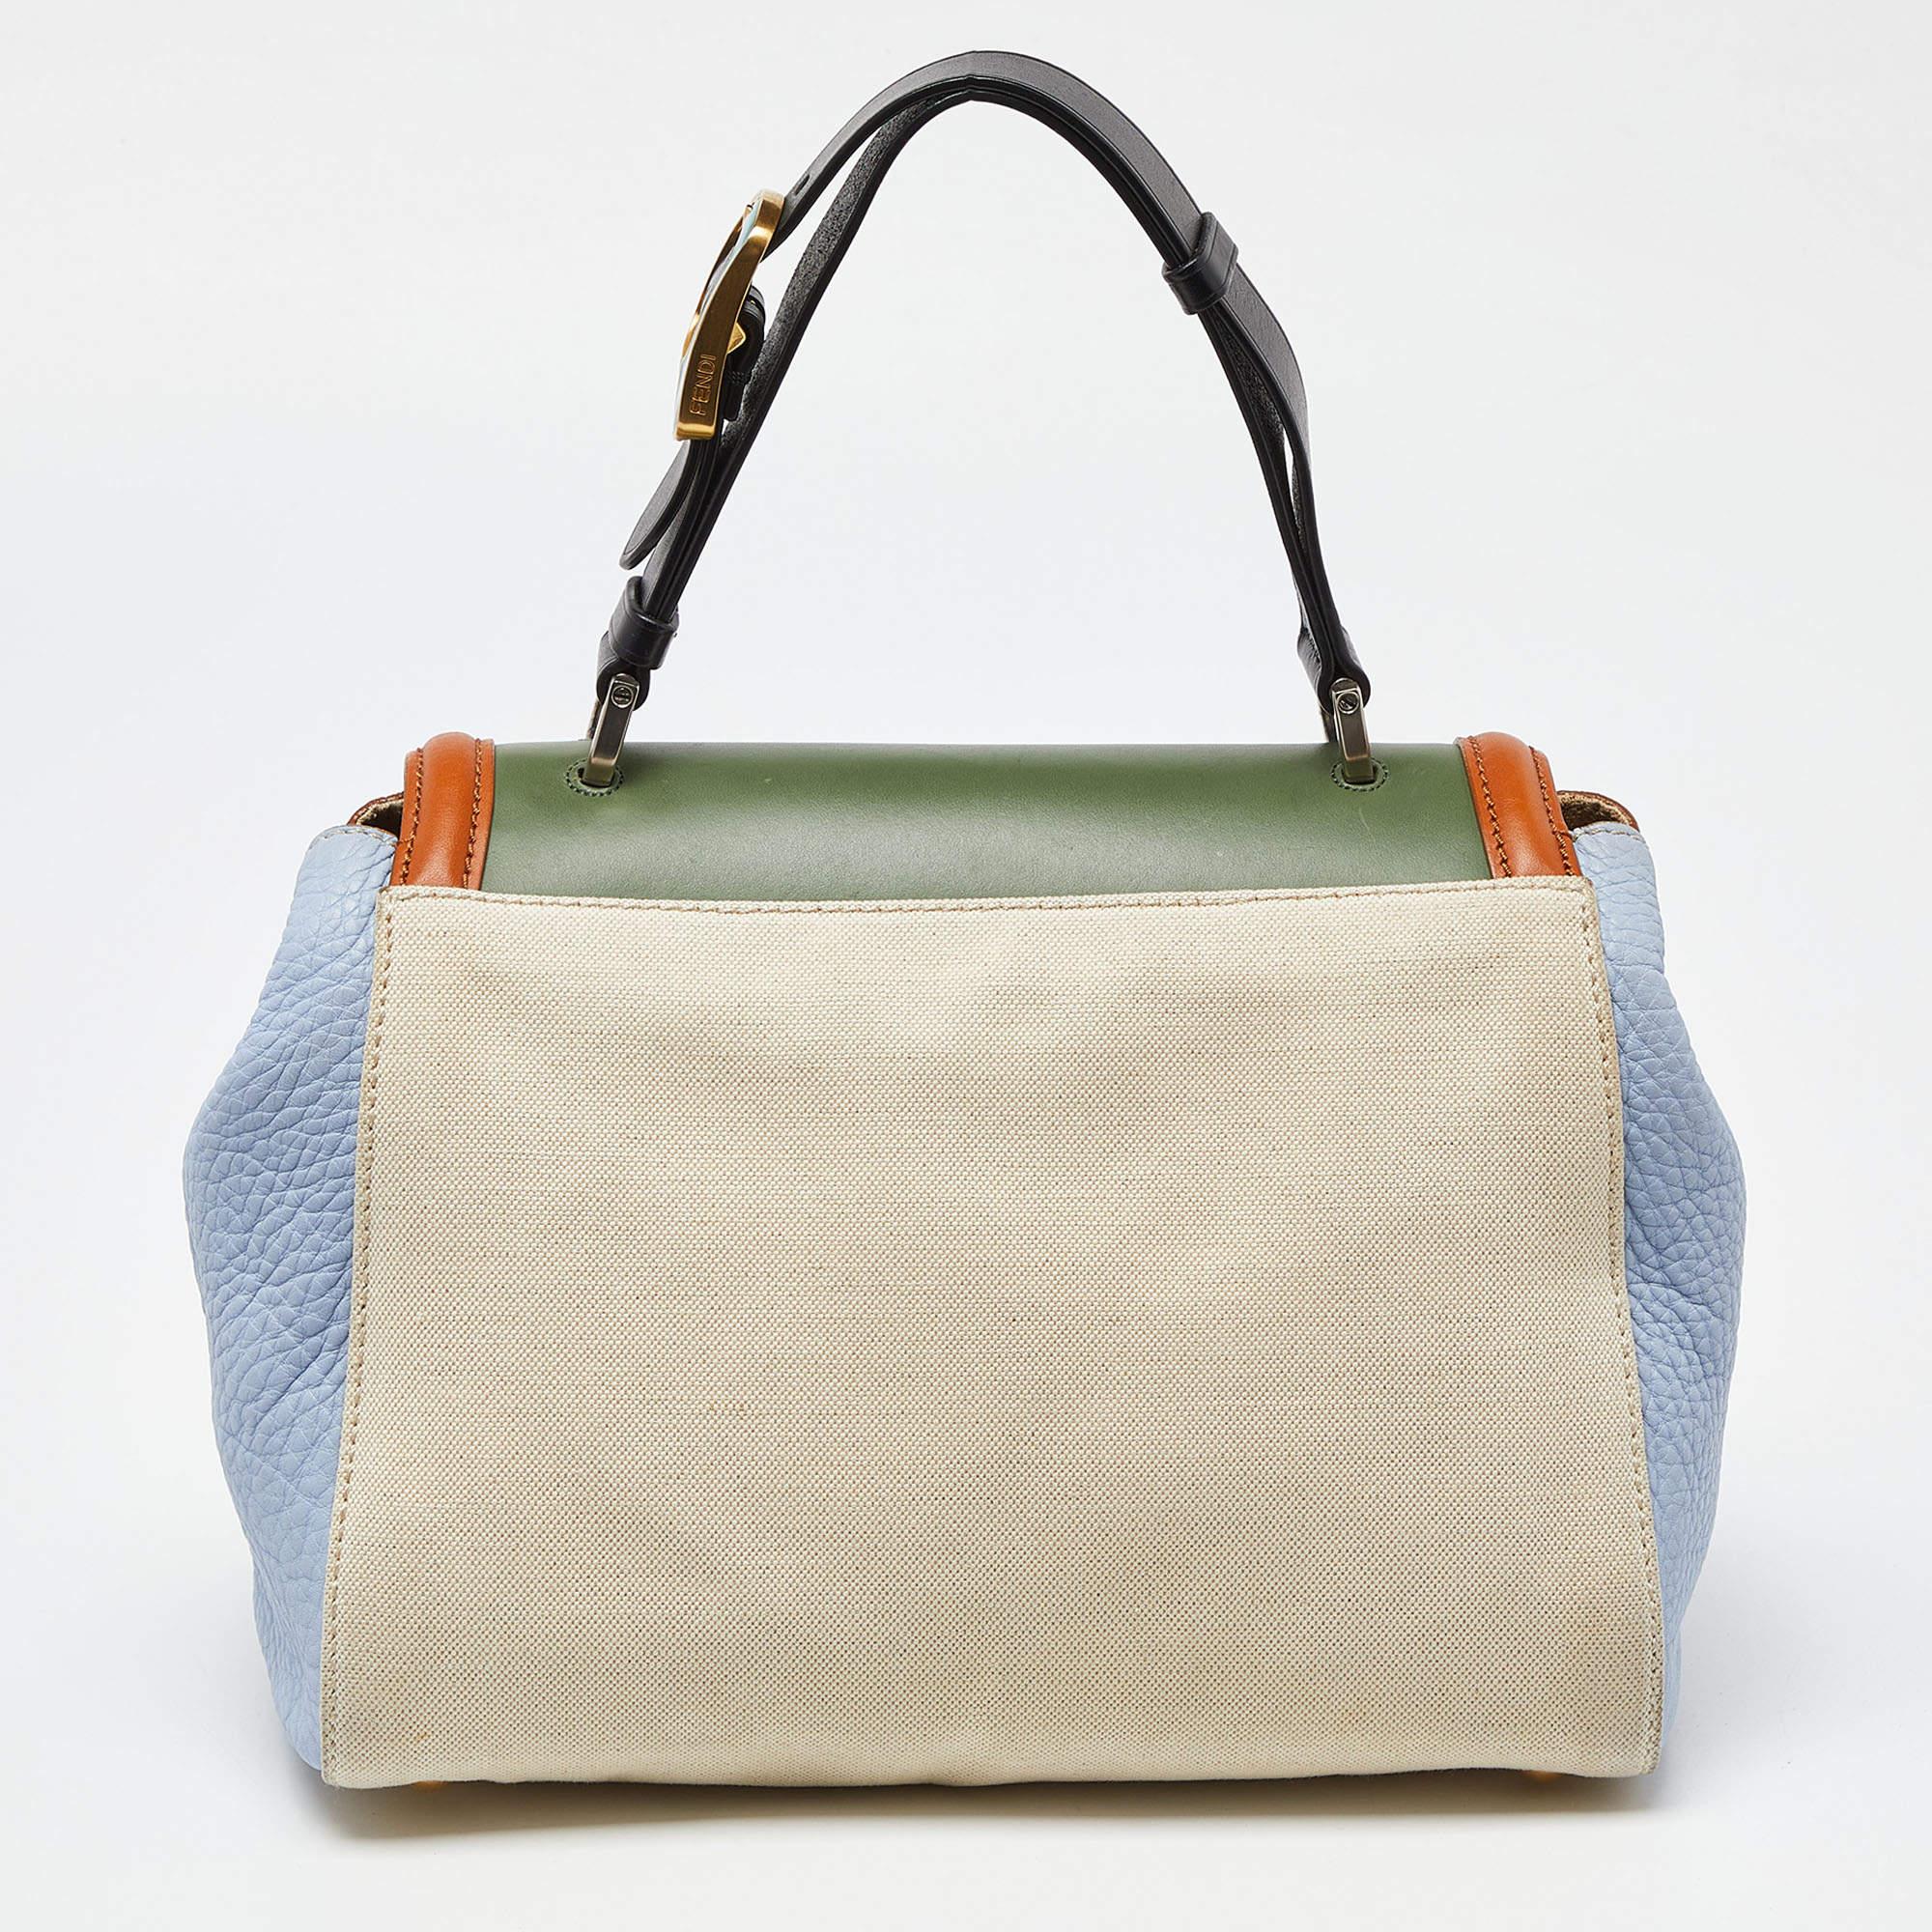 Women's Fendi Multicolor Canvas and Leather Silvana Top Handle Bag